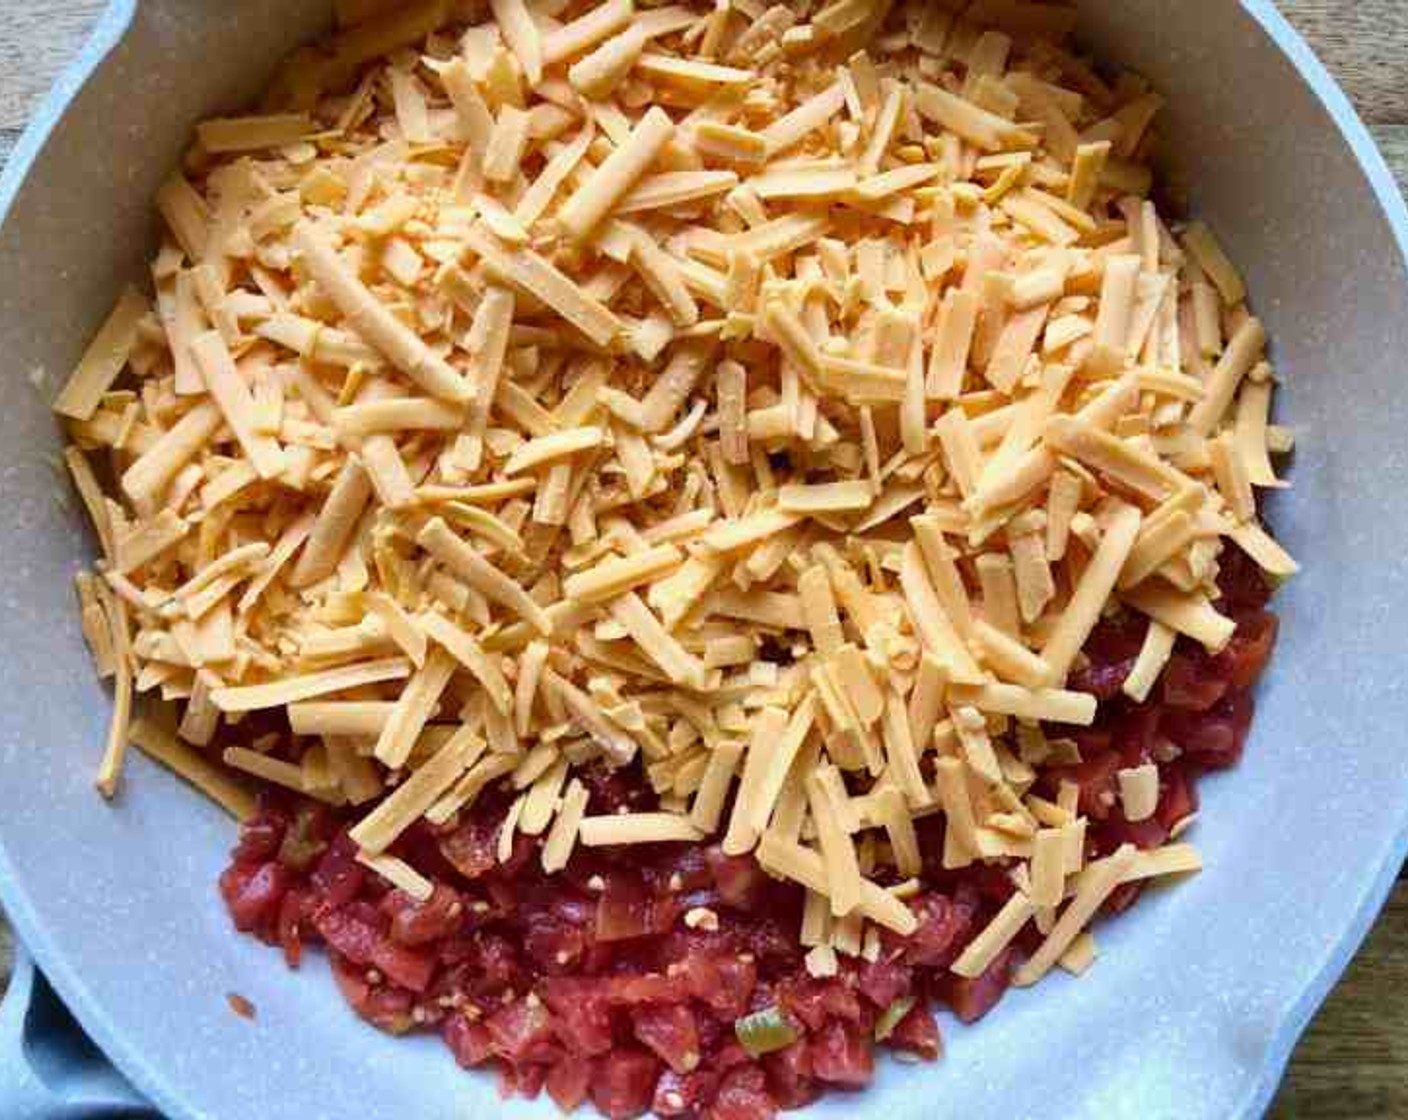 step 3 Add Shredded Cheddar Cheese (4 cups) and Diced Tomatoes with Green Chilies (1 can) to the pan. Cook over medium-low heat for 5 minutes or until the cheese thoroughly melts.